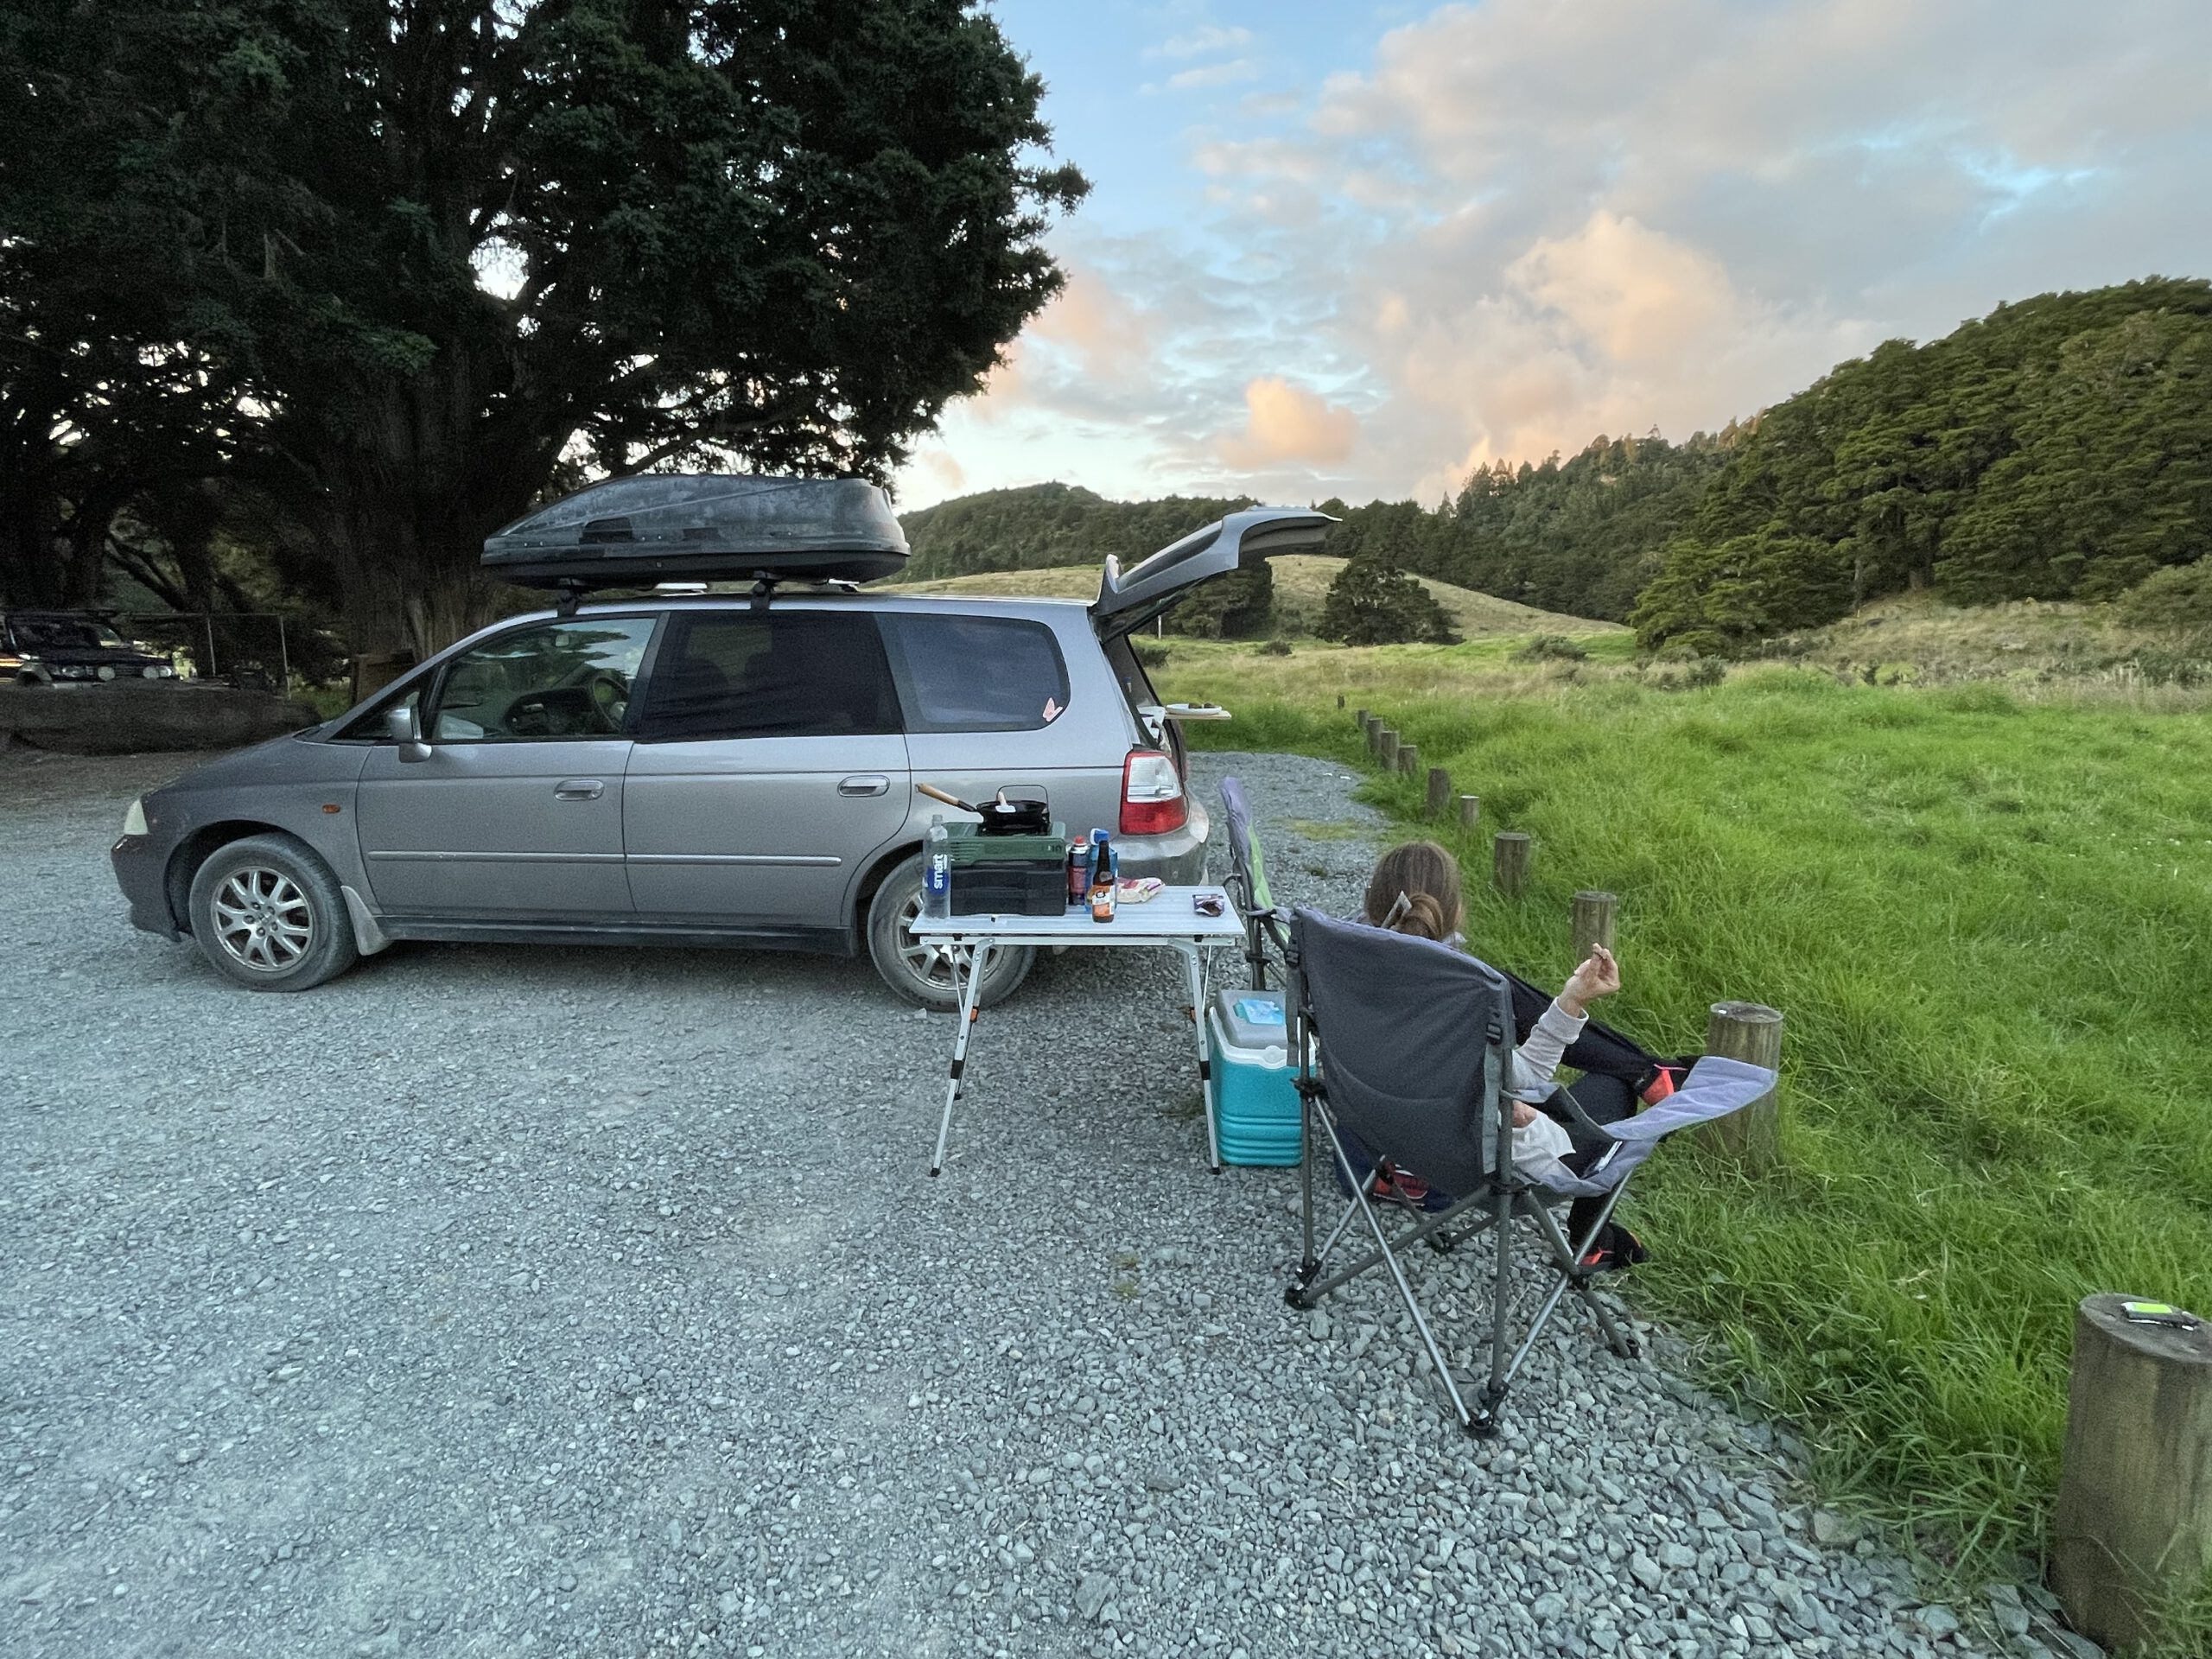 Setting up camp on the North Island in New Zealand after buying a campervan